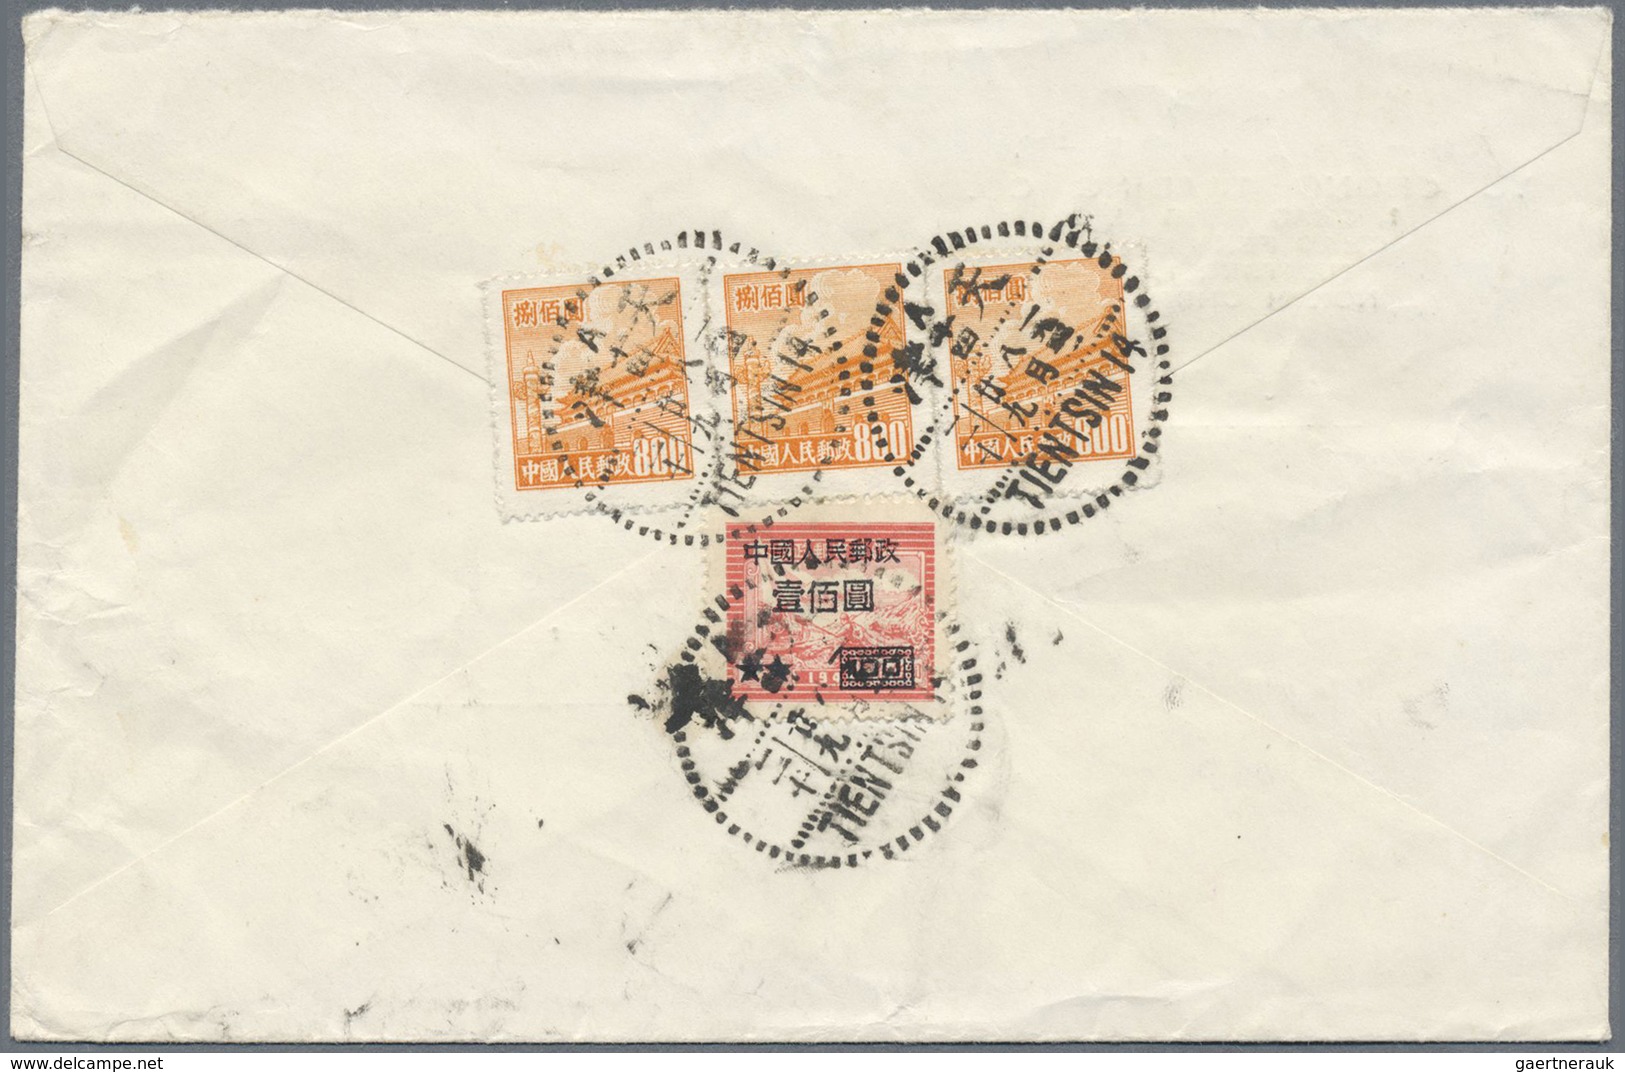 Br China - Volksrepublik: 1950/62, airmail covers (7), six to Switzerland and one to Denmark.